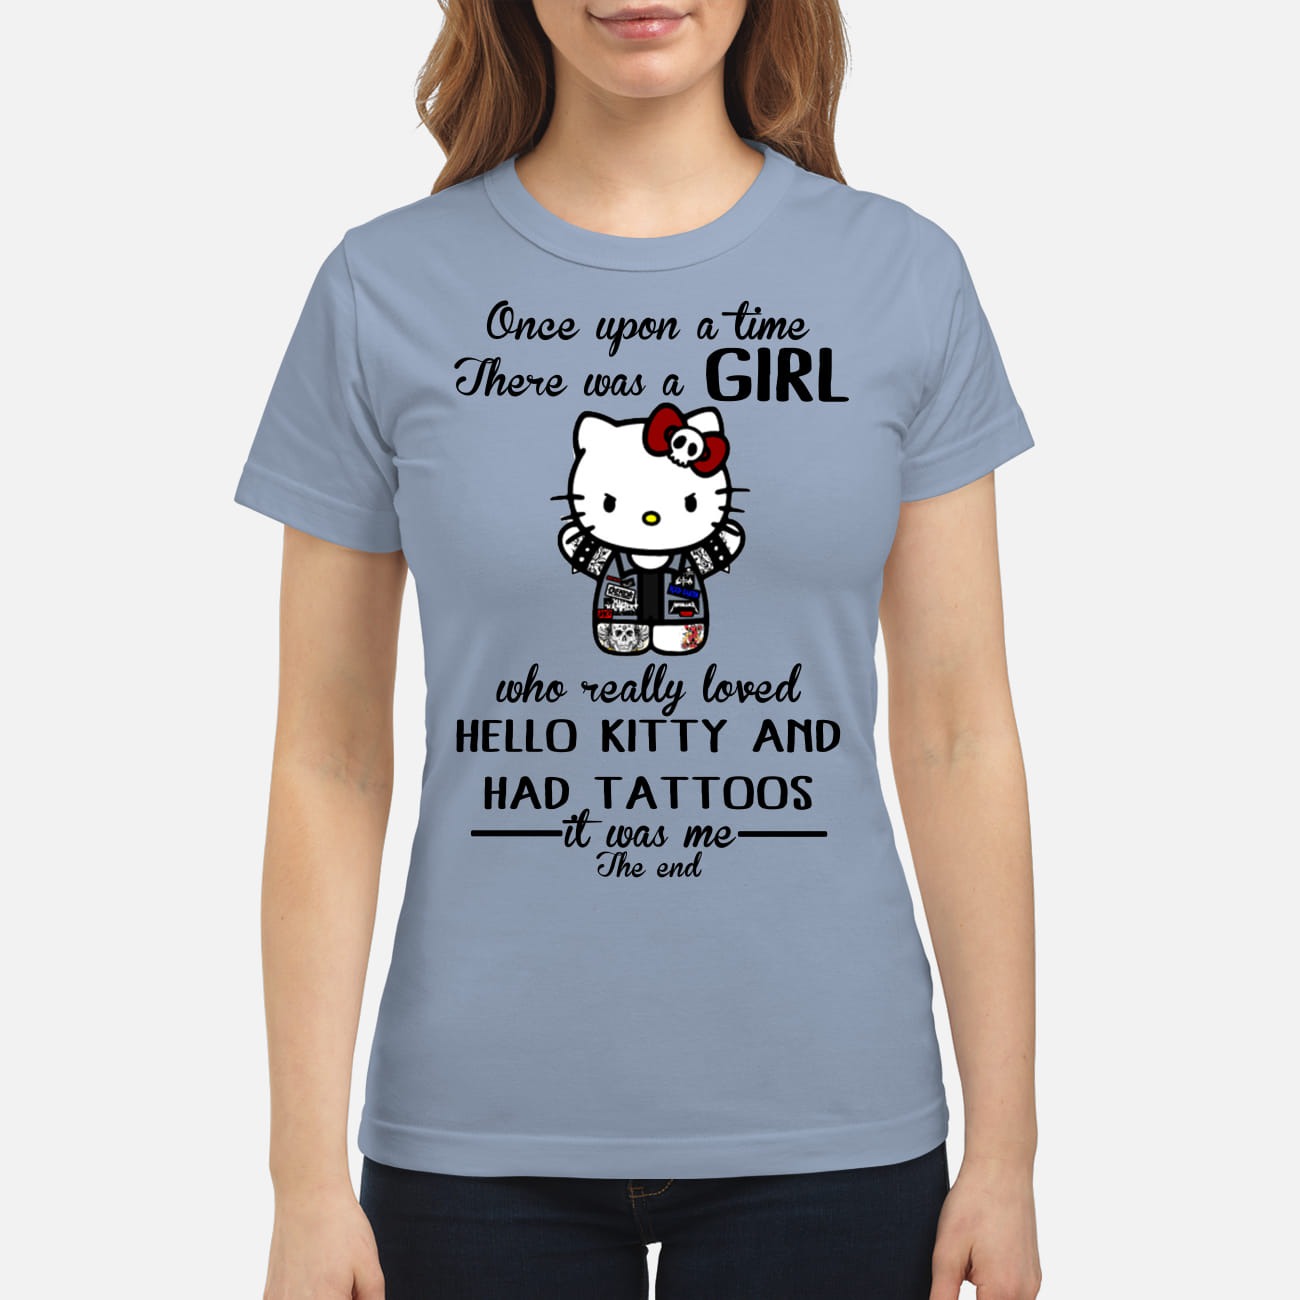 There was a girl who loved hello kitty and had tattoos classic shirt